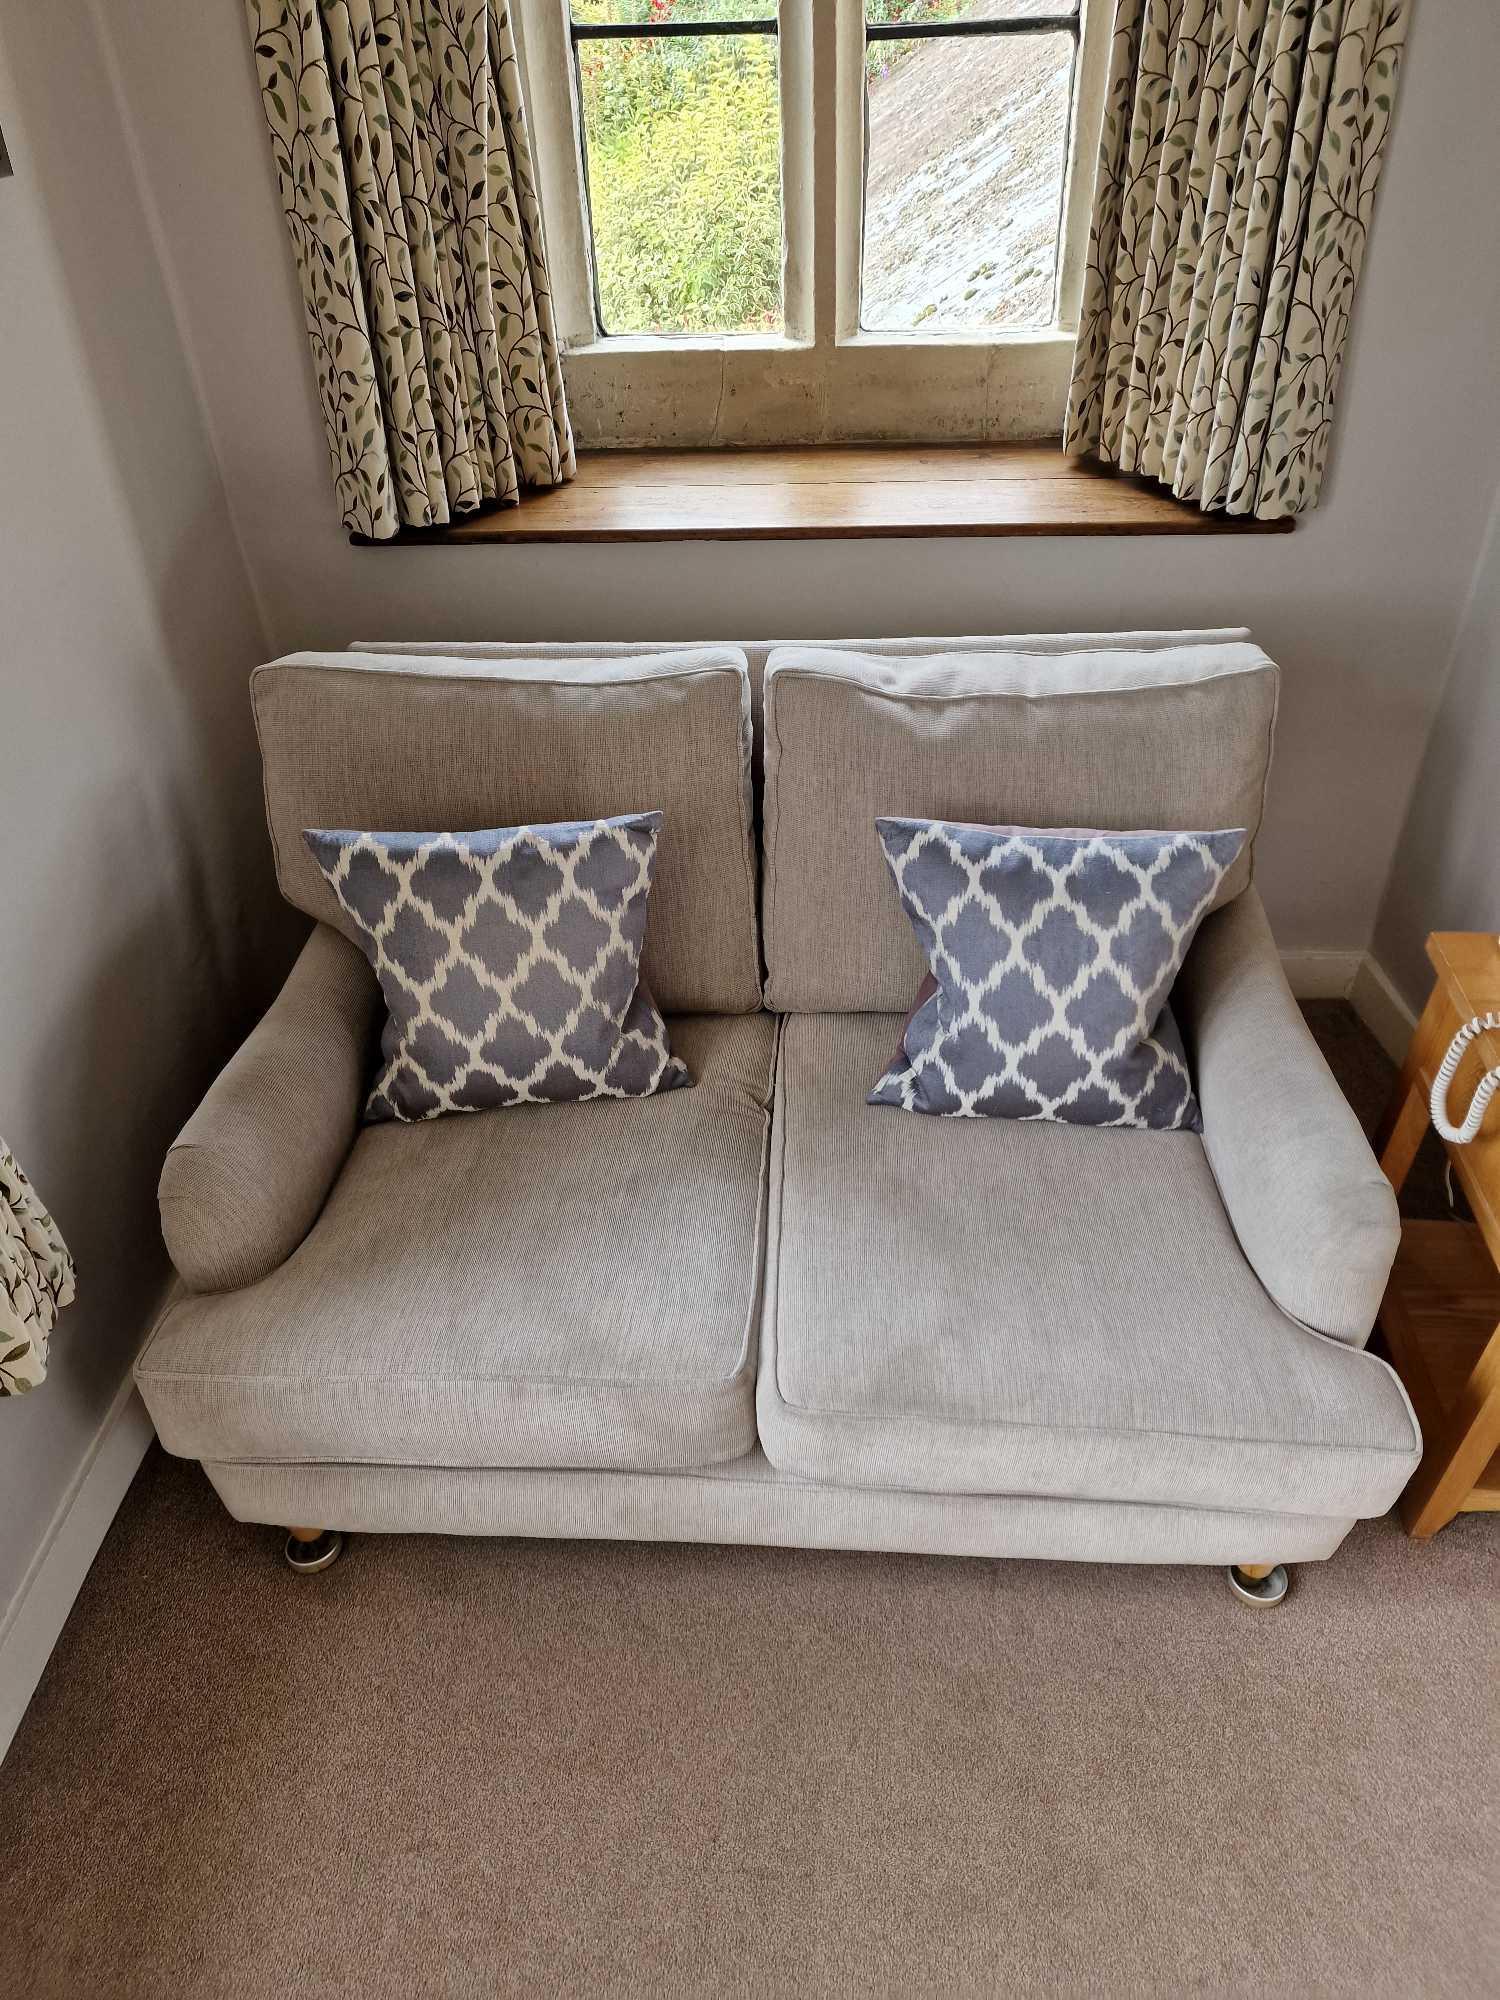 Pekalp London Oxford Two Seater Sofa Upholstered In A Neutral Linen On Turned Wood Front Legs With - Image 2 of 2